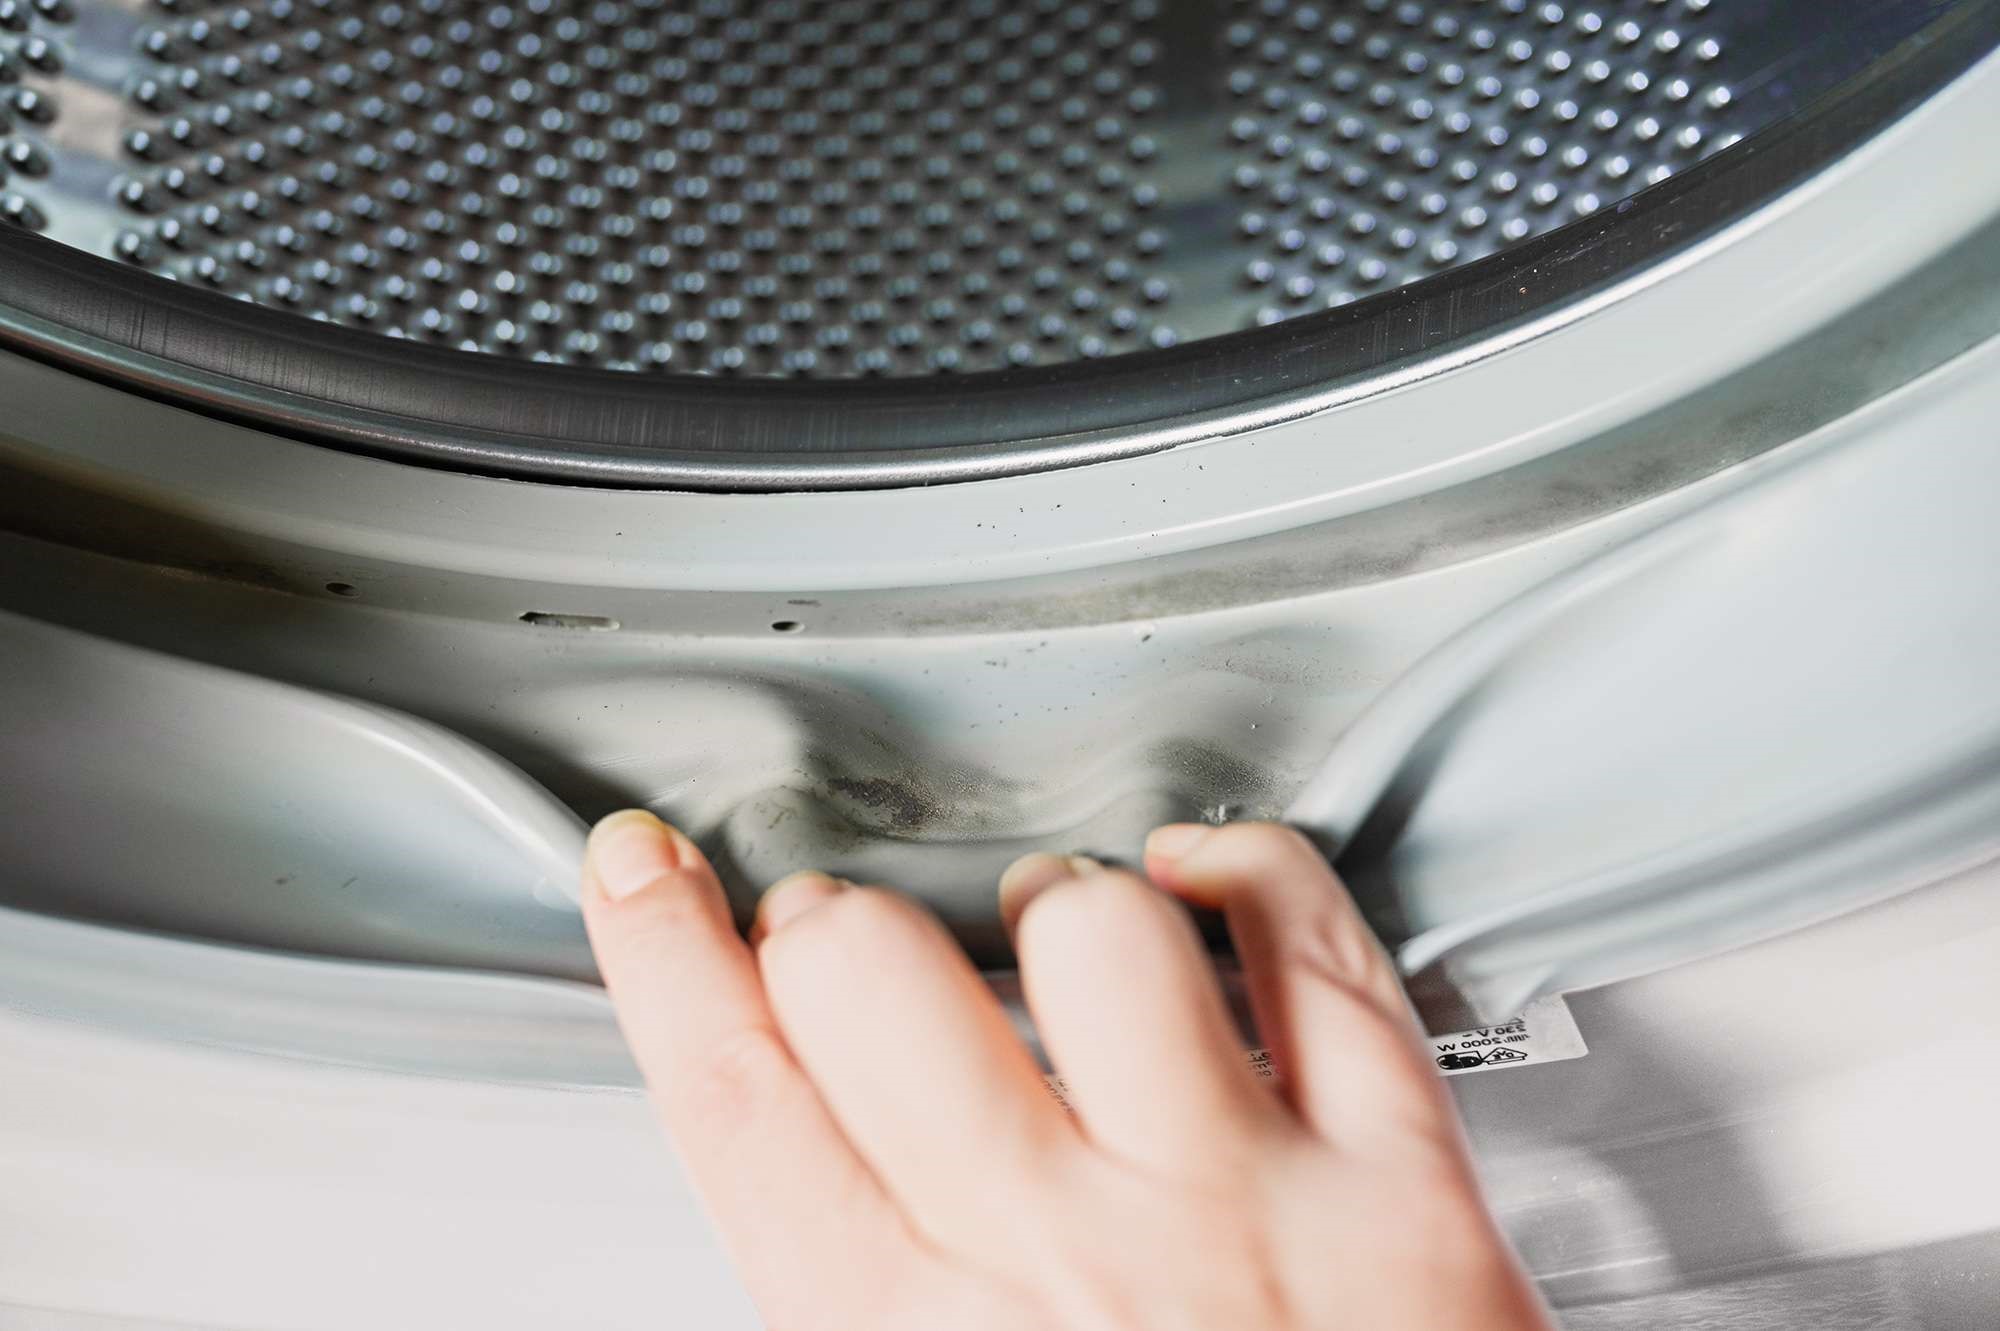 How To Get Mold Off Rubber In A Washing Machine